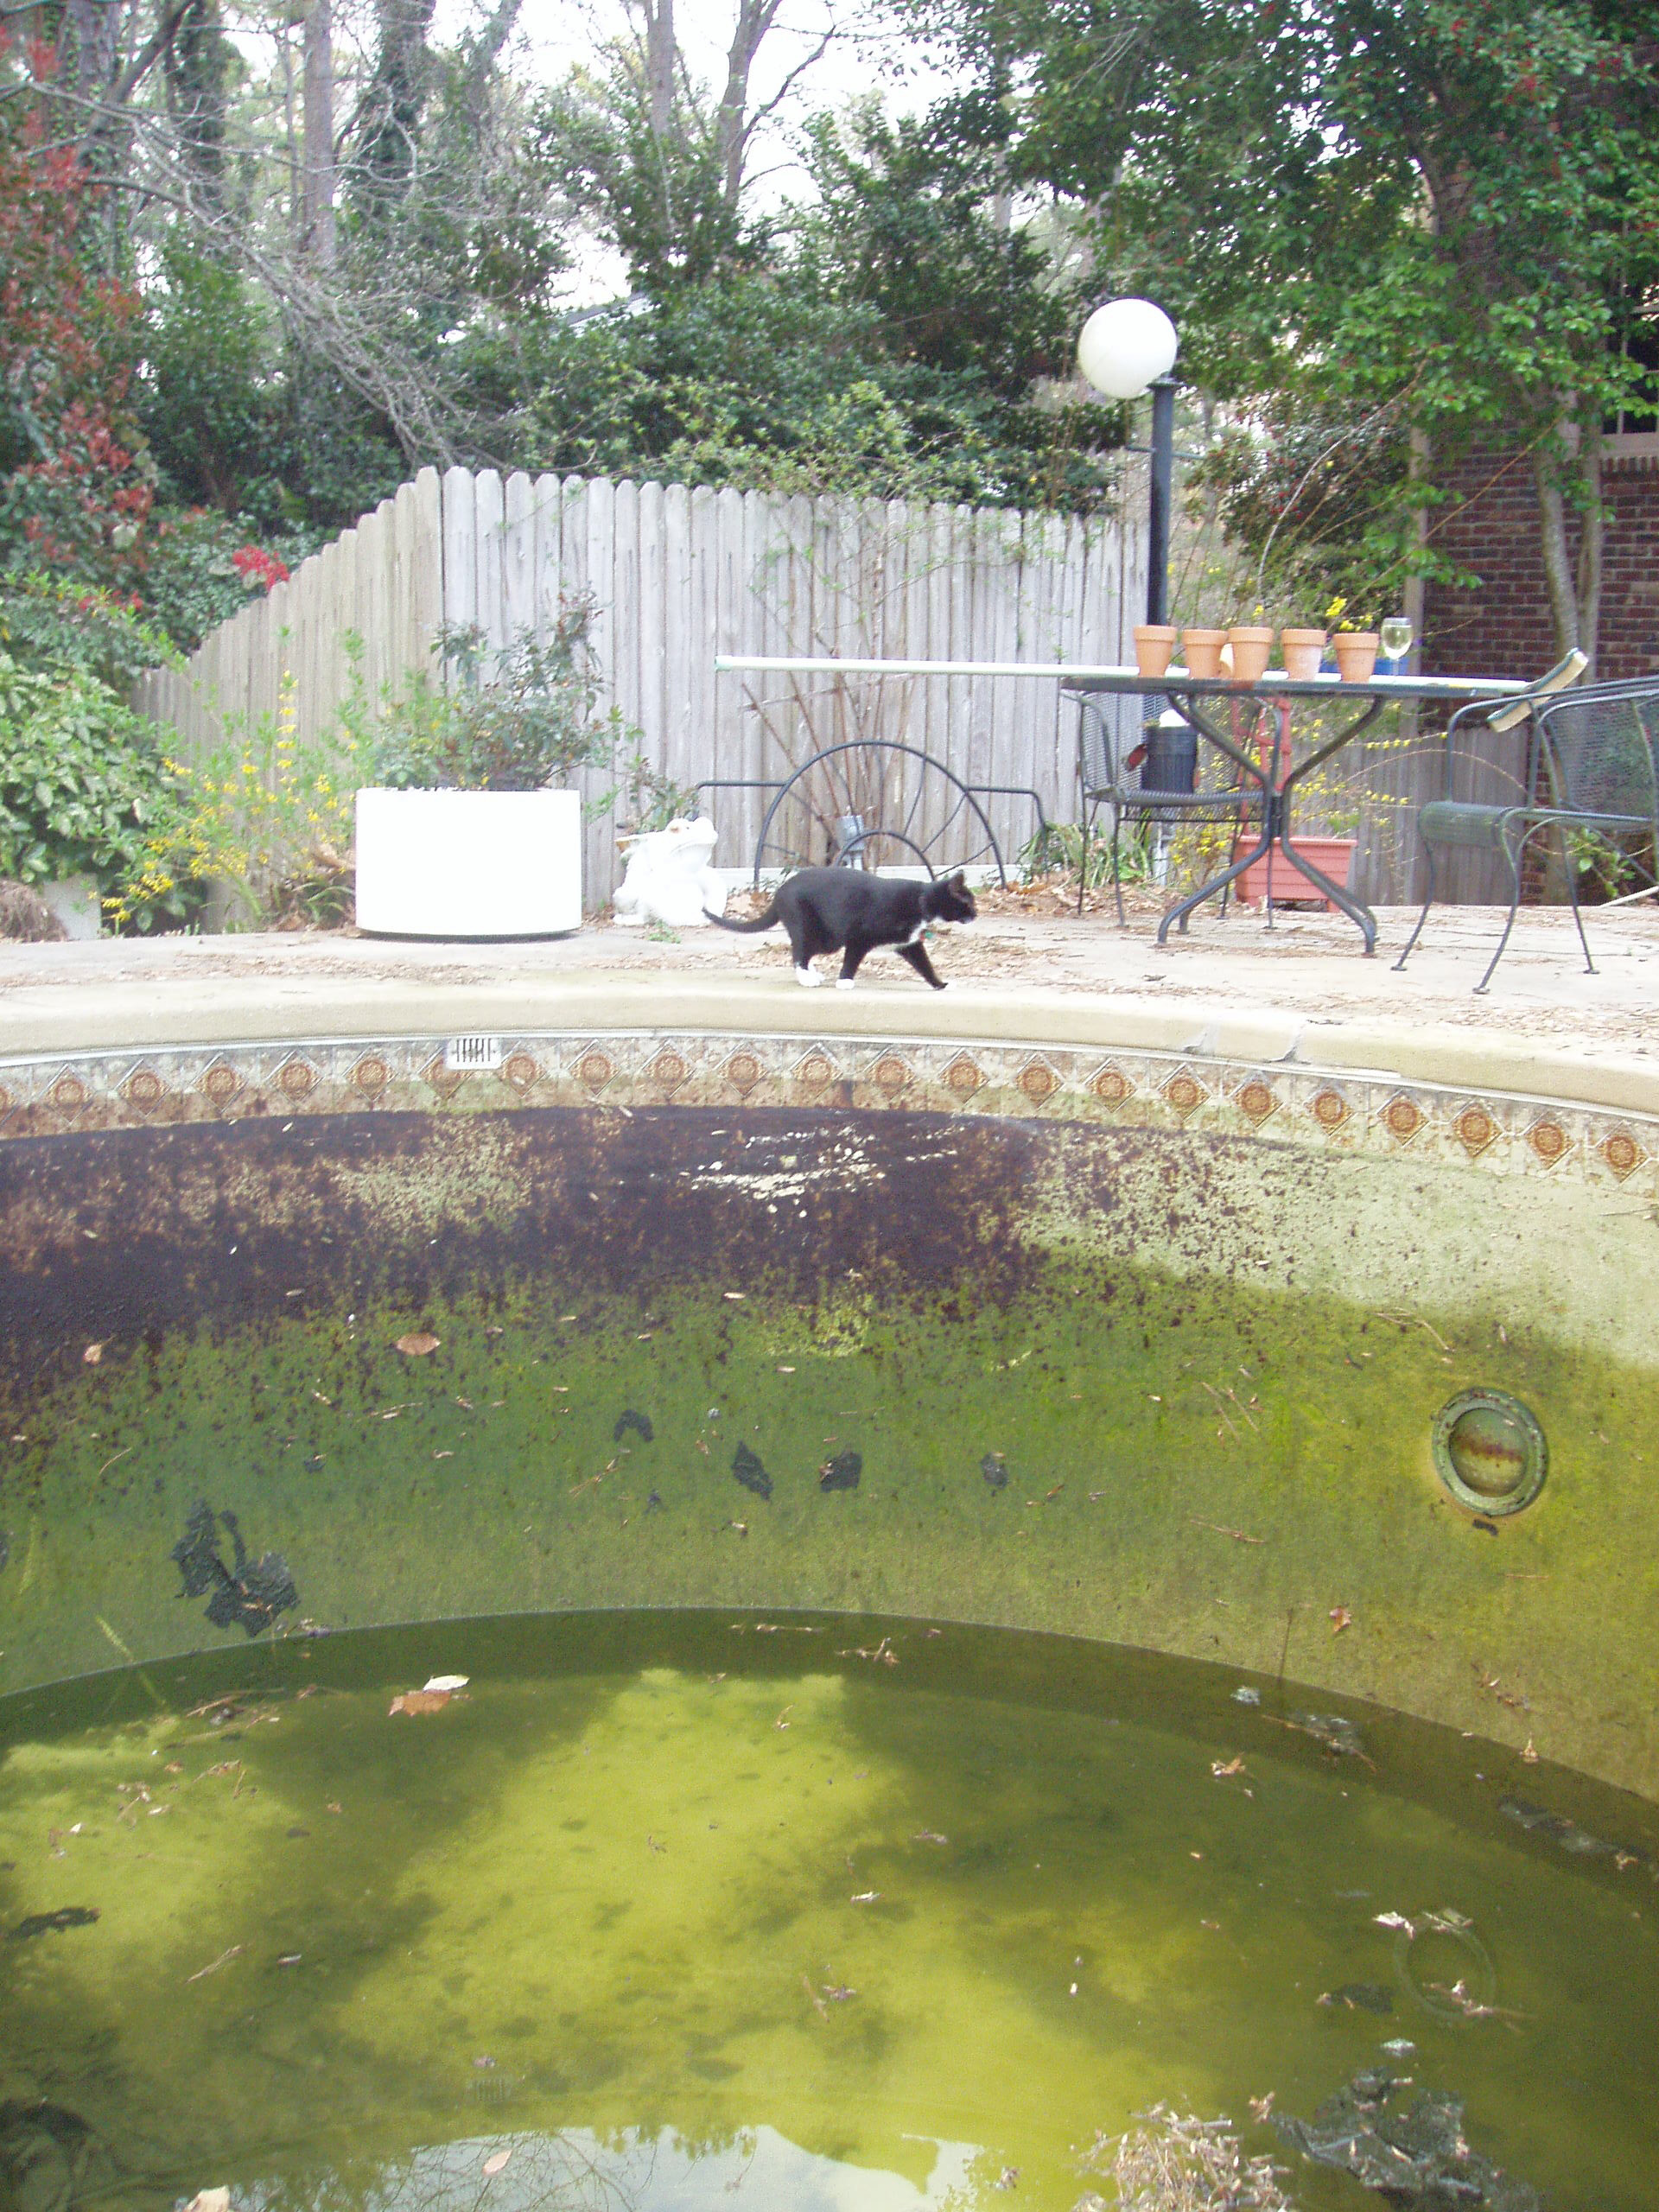 yucky pool with supervisory cat